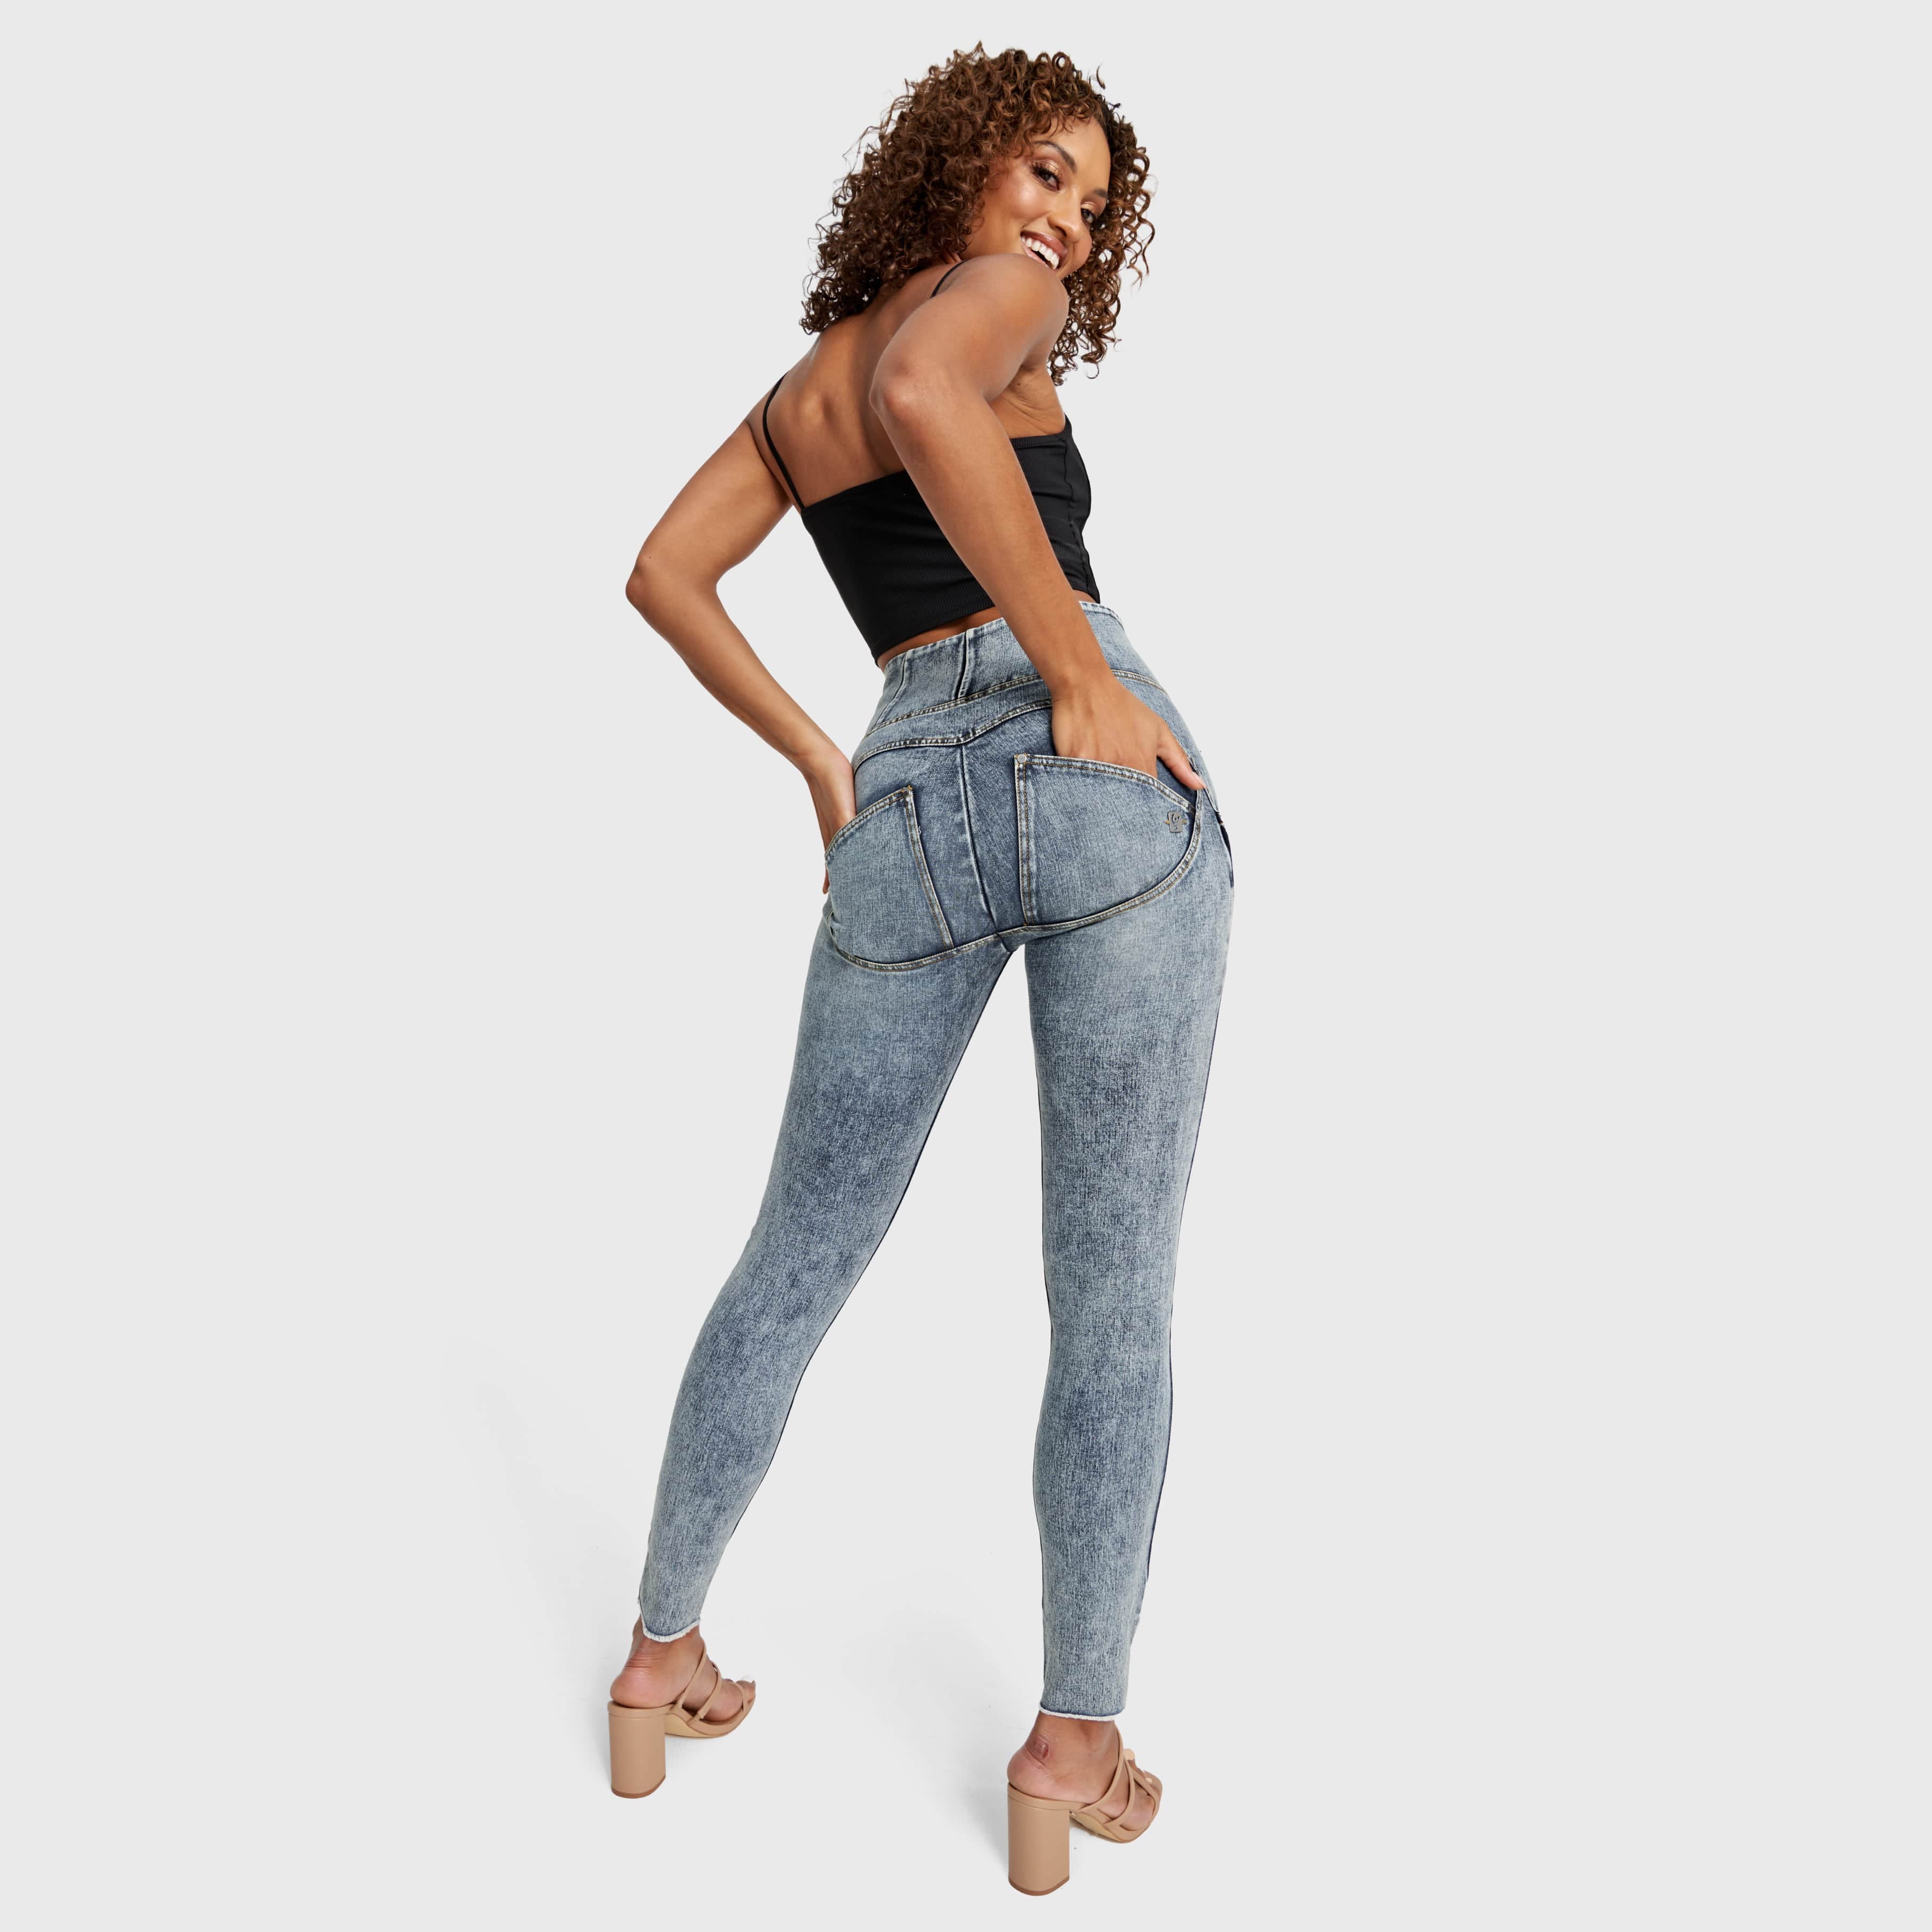 WR.UP® Snug Ripped Jeans - High Waisted - Full Length - Blue Stonewash + Yellow Stitching 2